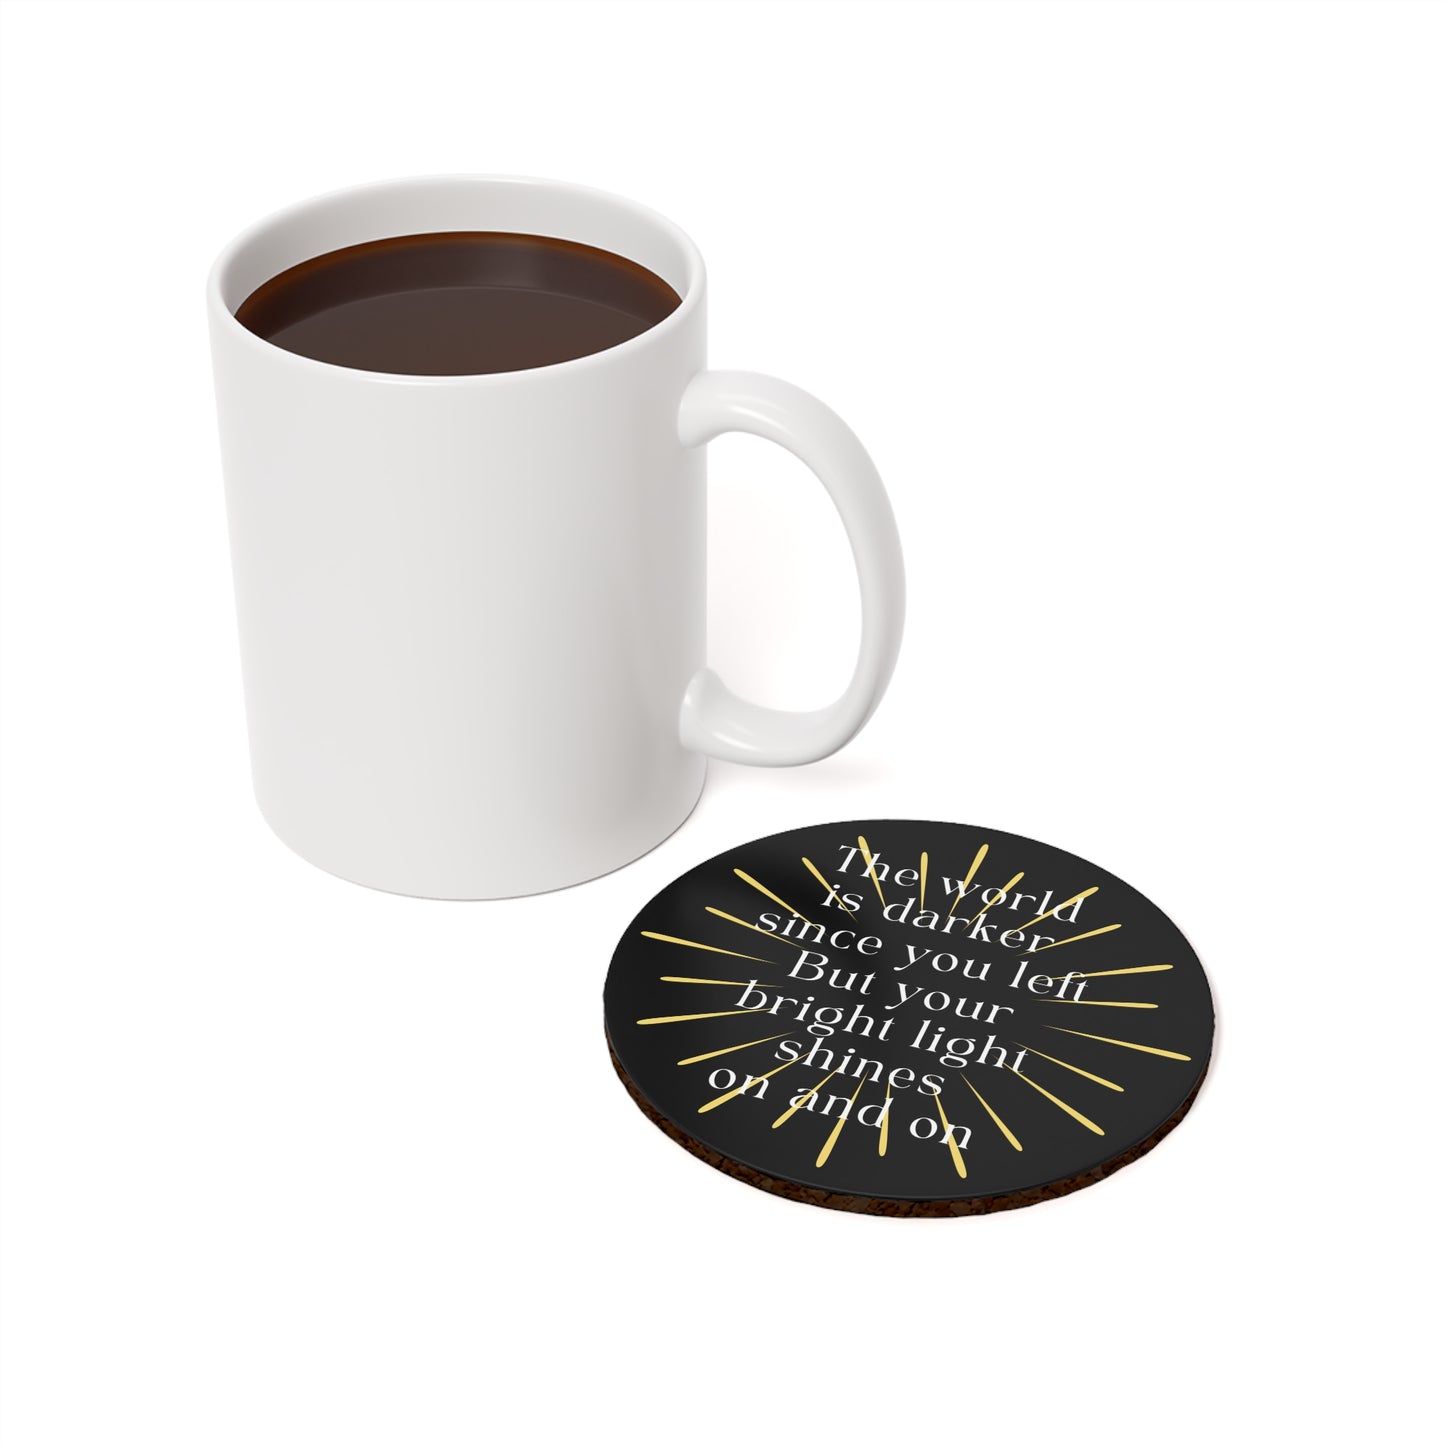 Coaster for Candles, Mugs, Glasses, The World Is Darker Since You Left